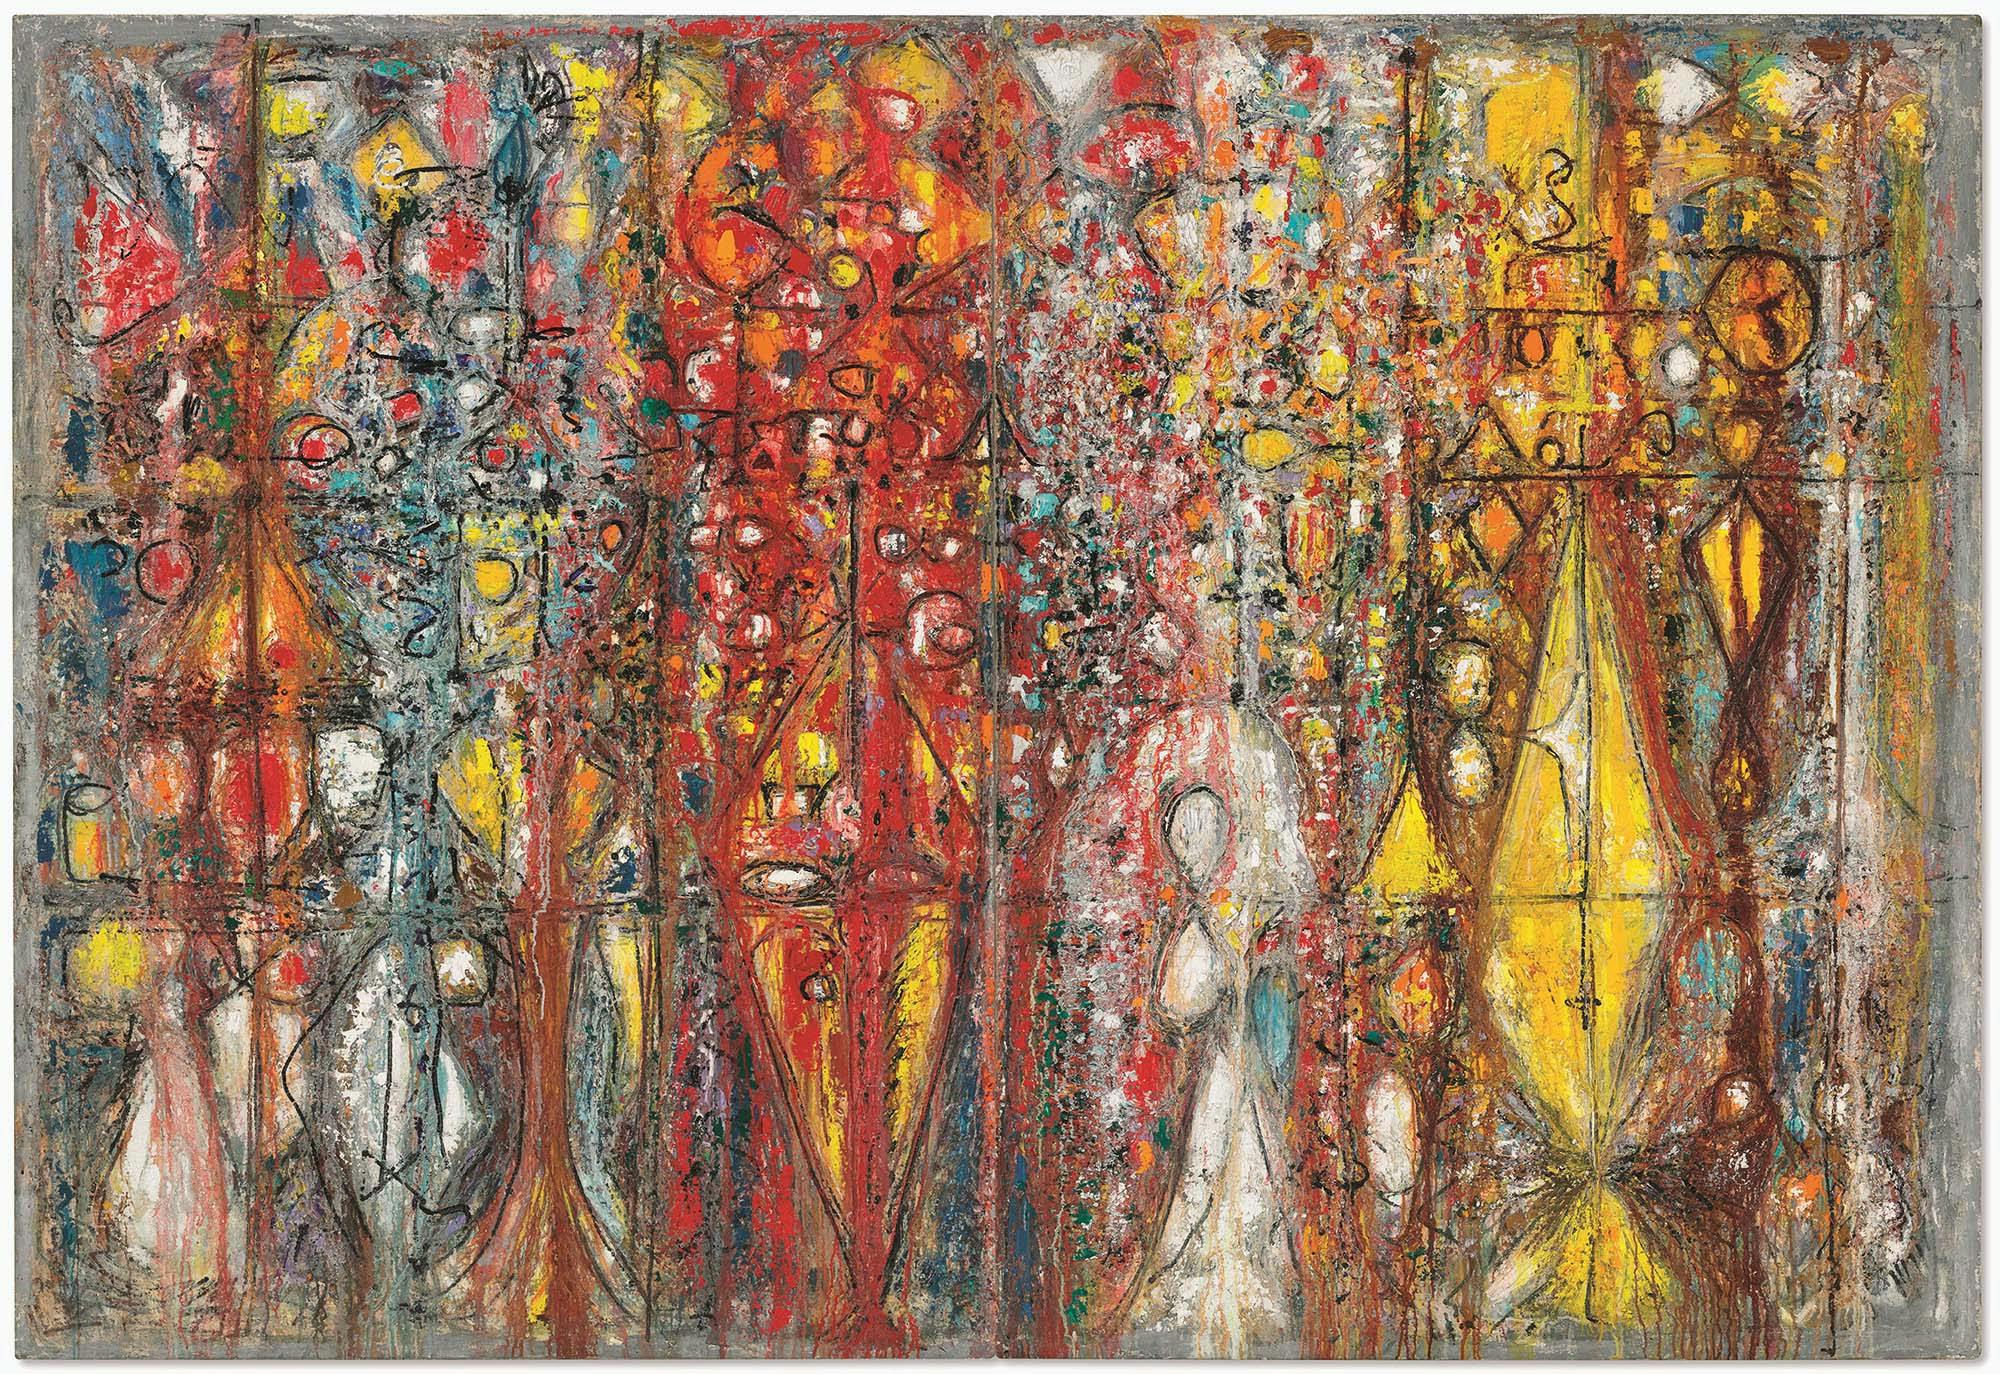 Blood Wedding
1958
Oil on linen
72 x 112 in. (182.9 x 284.5 cm) Diptych
Private Collection
 – The Richard Pousette-Dart Foundation